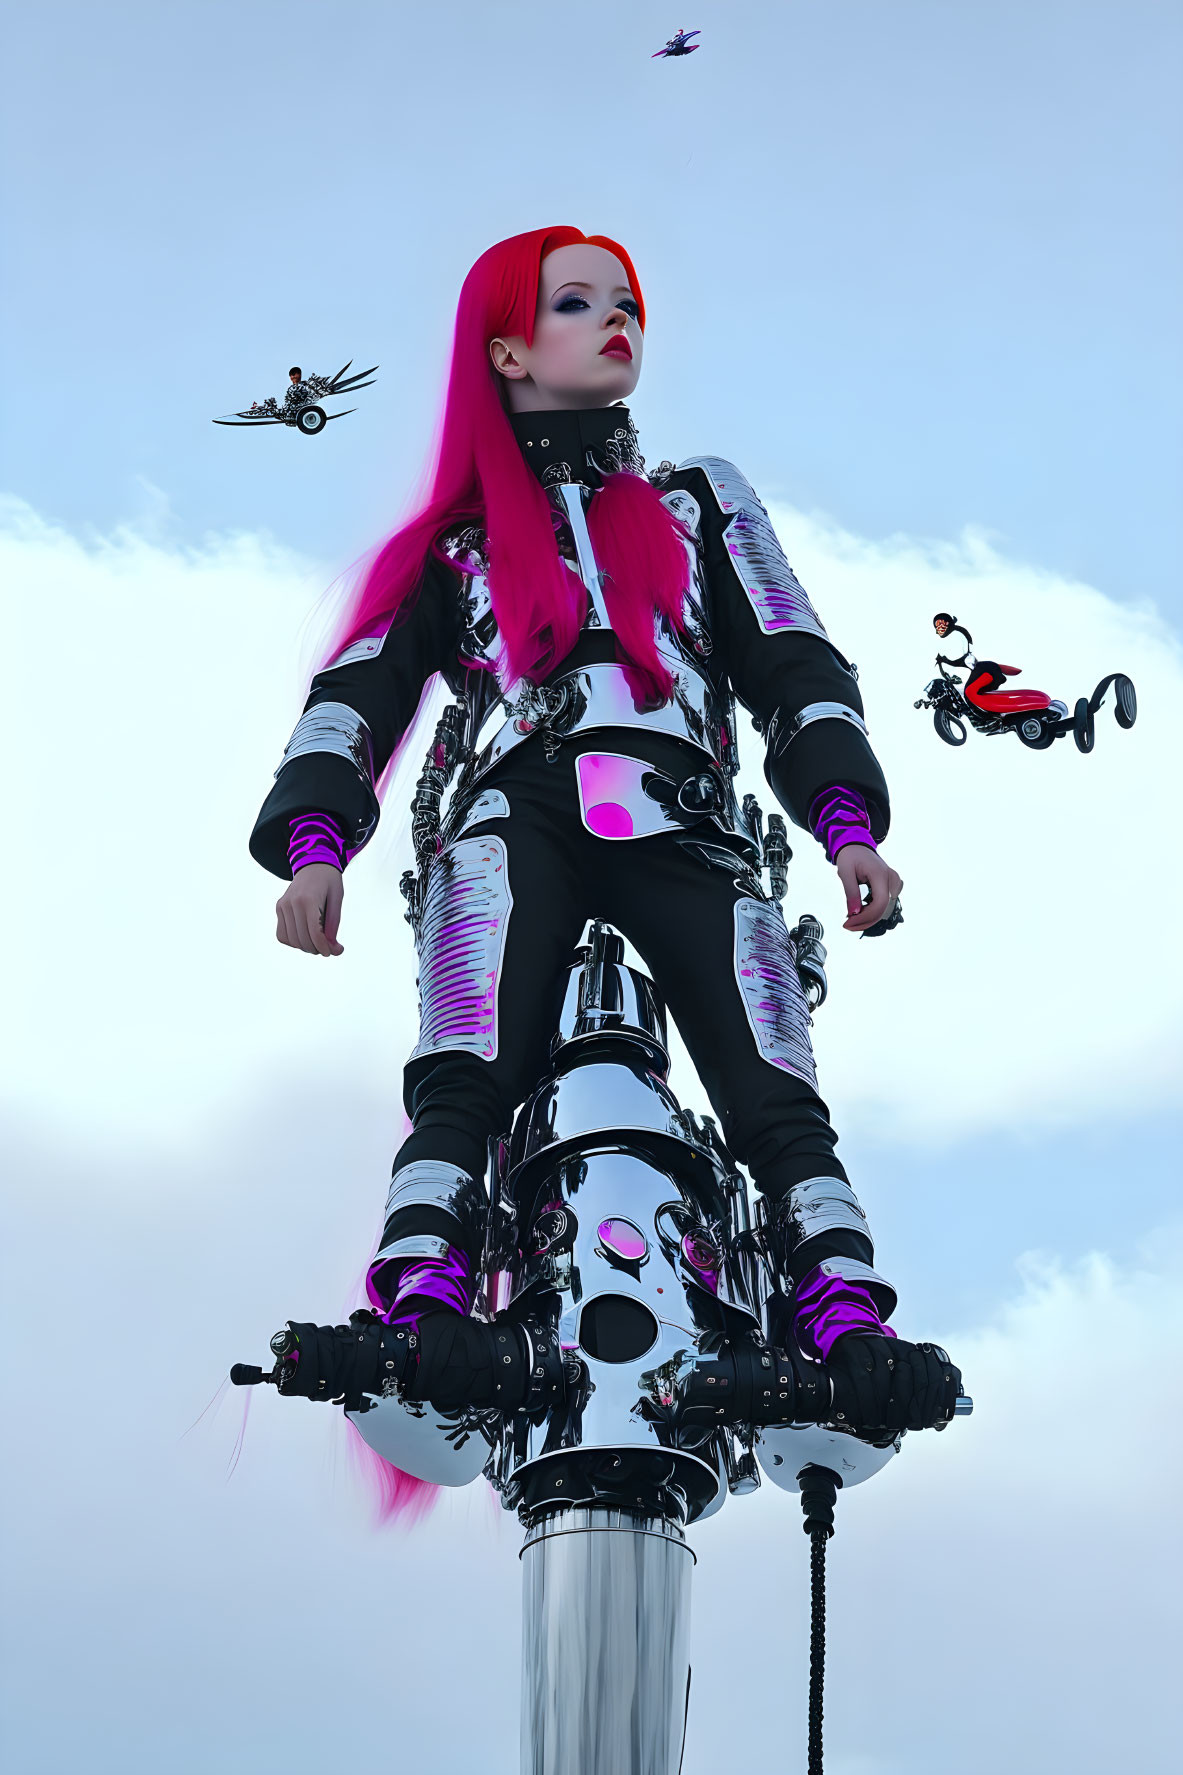 Futuristic woman with pink hair on mechanical device with drones and floating bike in background against blue sky